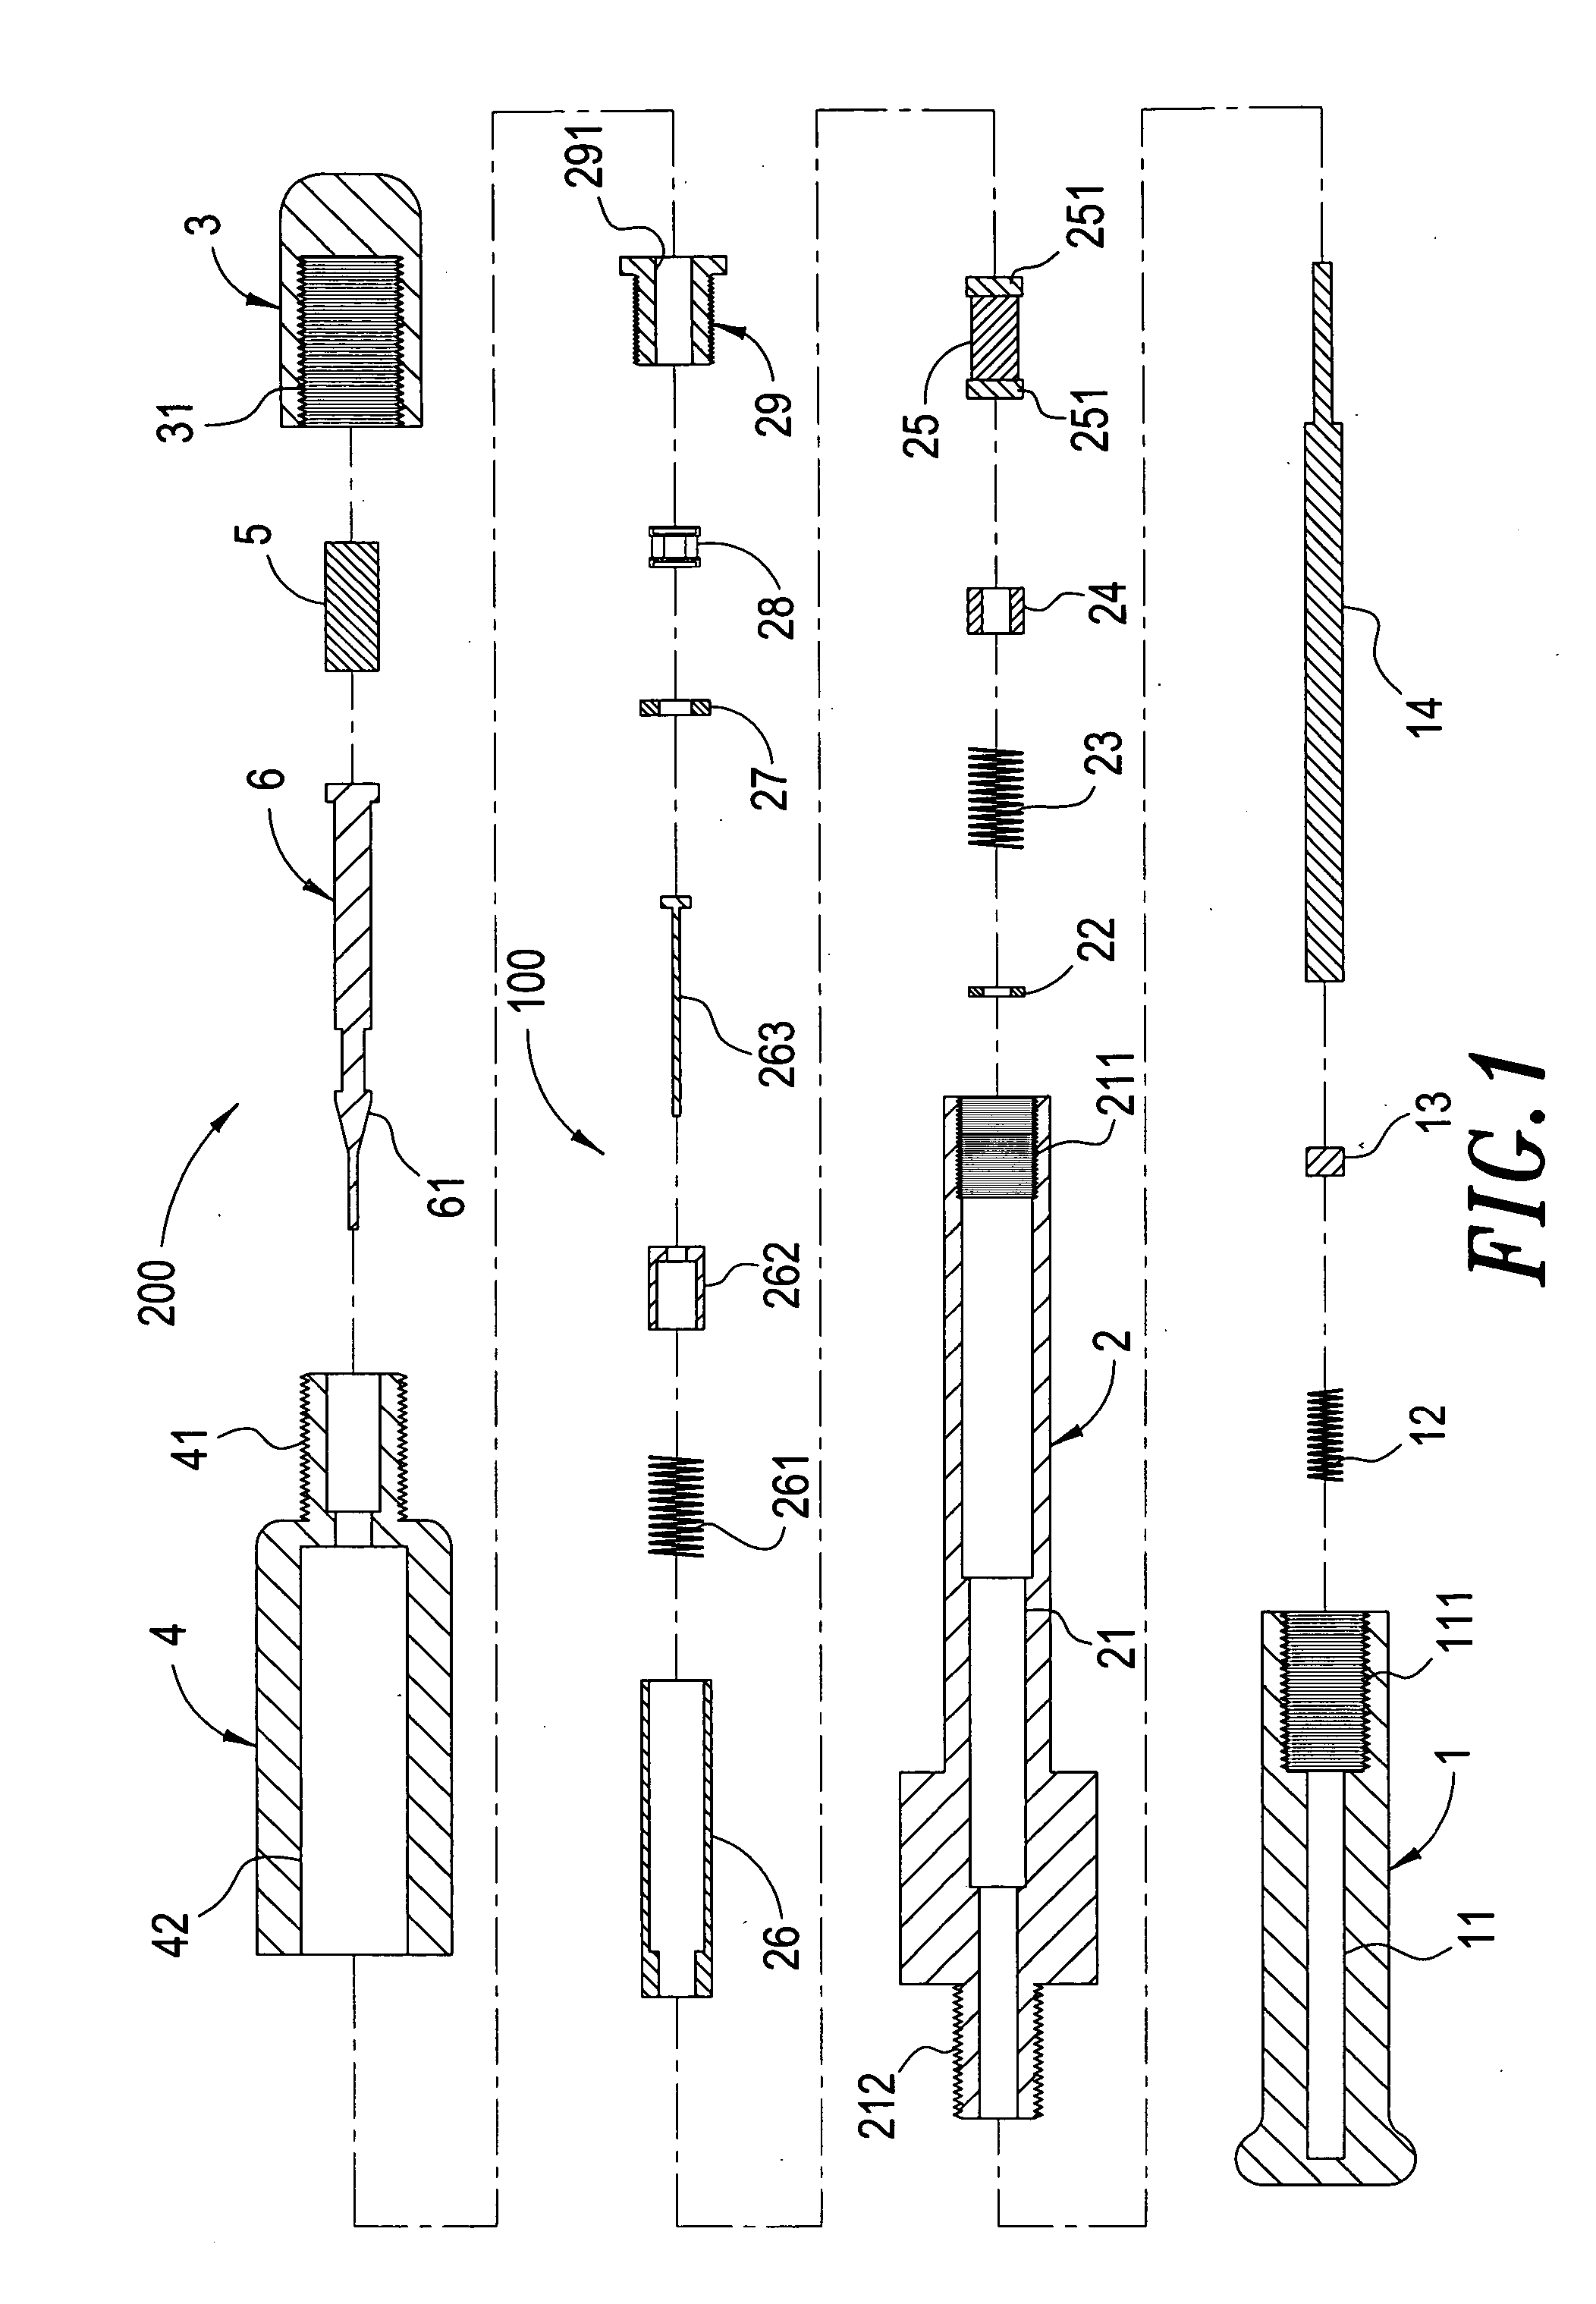 Passive RFID-based electronic seal